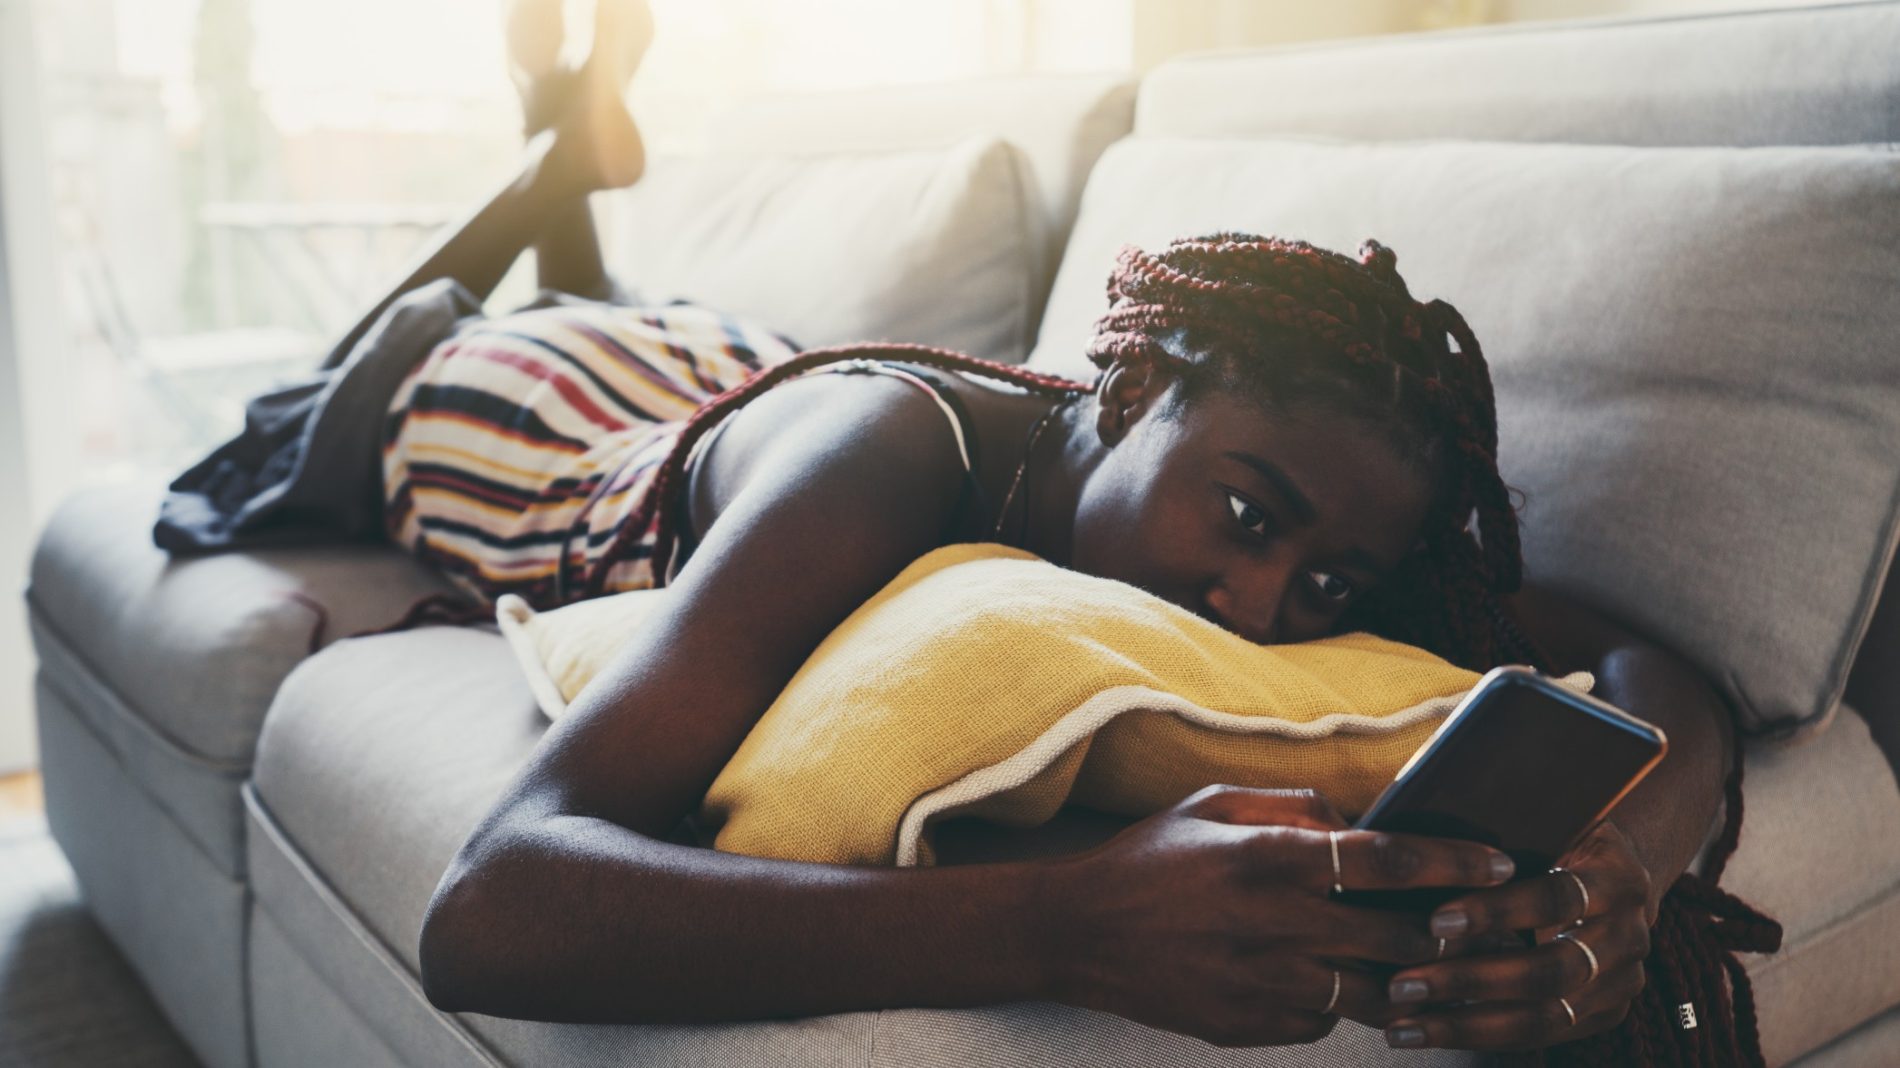 Photograph of a person lying on the couch and looking at their phone